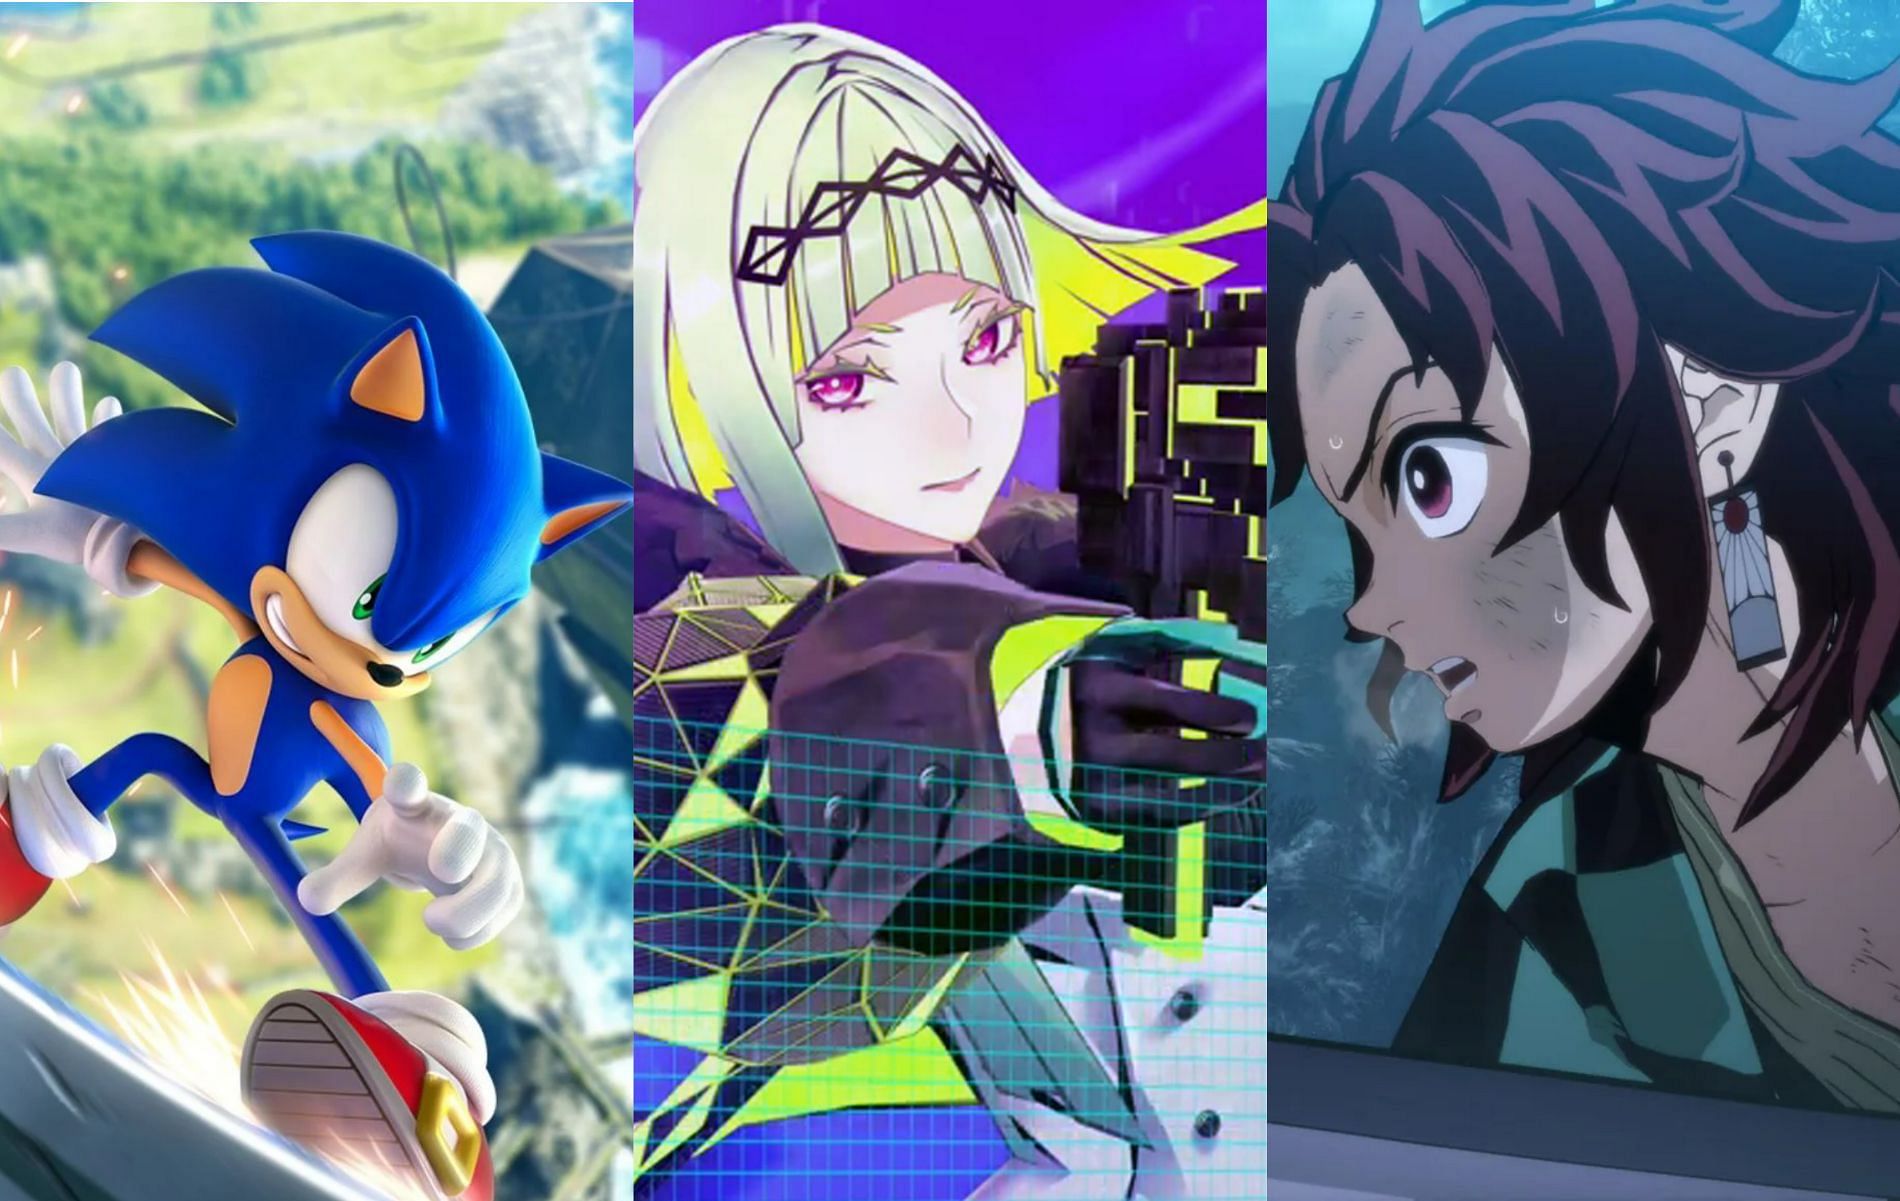  SEGA has already confirmed the list of games that fans can look forward to at Gamescom 2022 (Images via Sonic Frontiers, Soul Hackers 2, and Demon Slayer -Kimetsu no Yaiba- The Hinokami Chronicles)